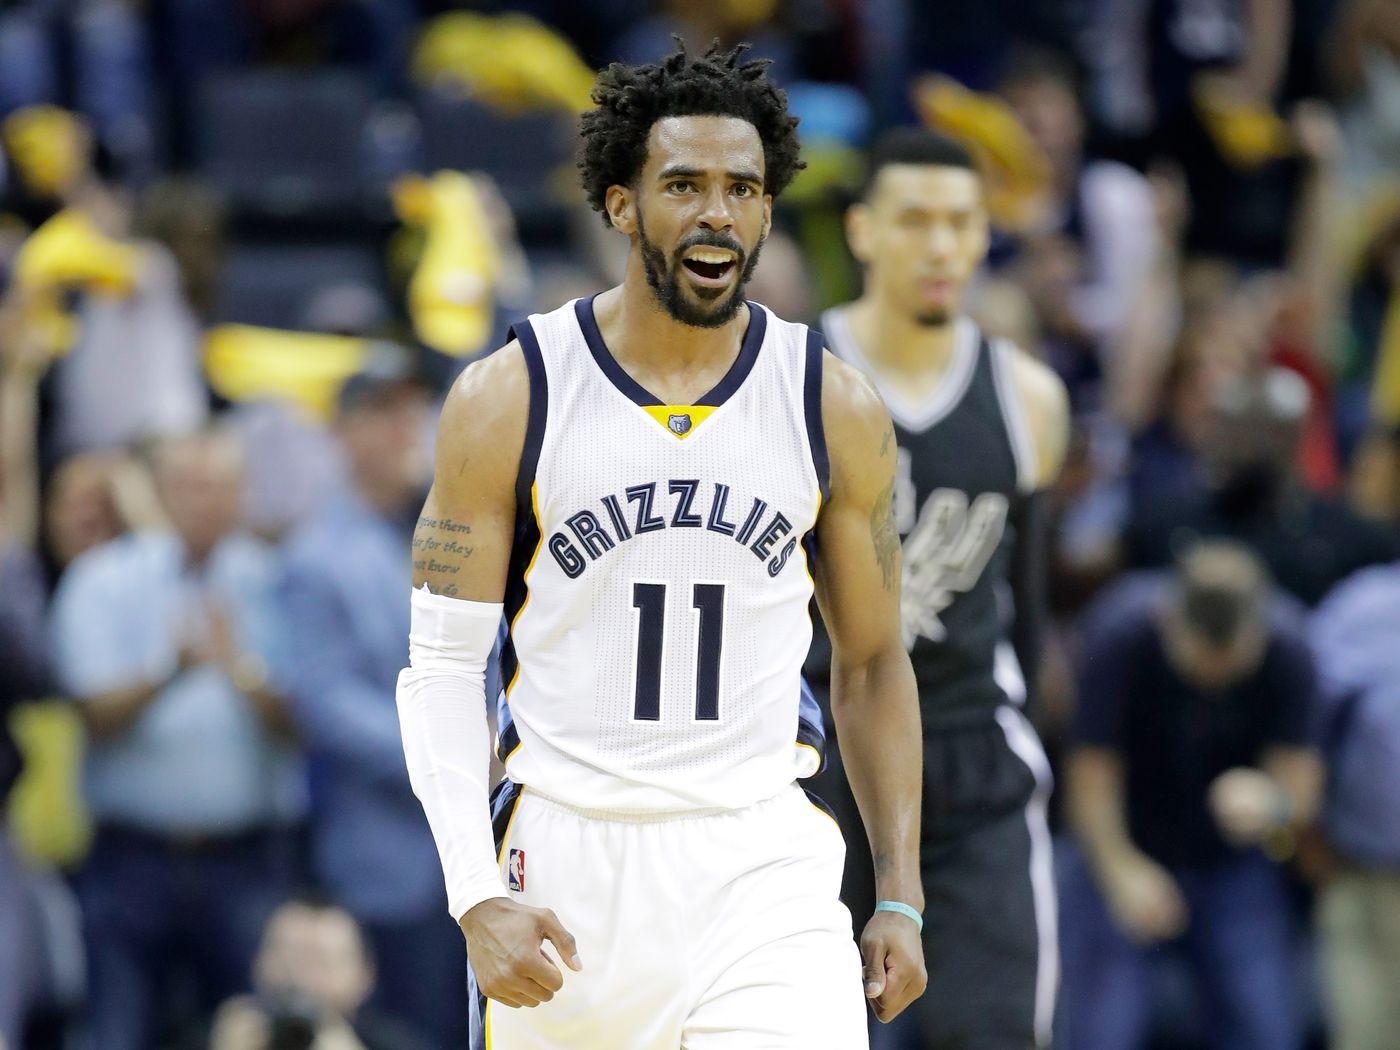 Grizzlies Spurs Game 4 Was An Instant Classic Thanks To Mike Conley